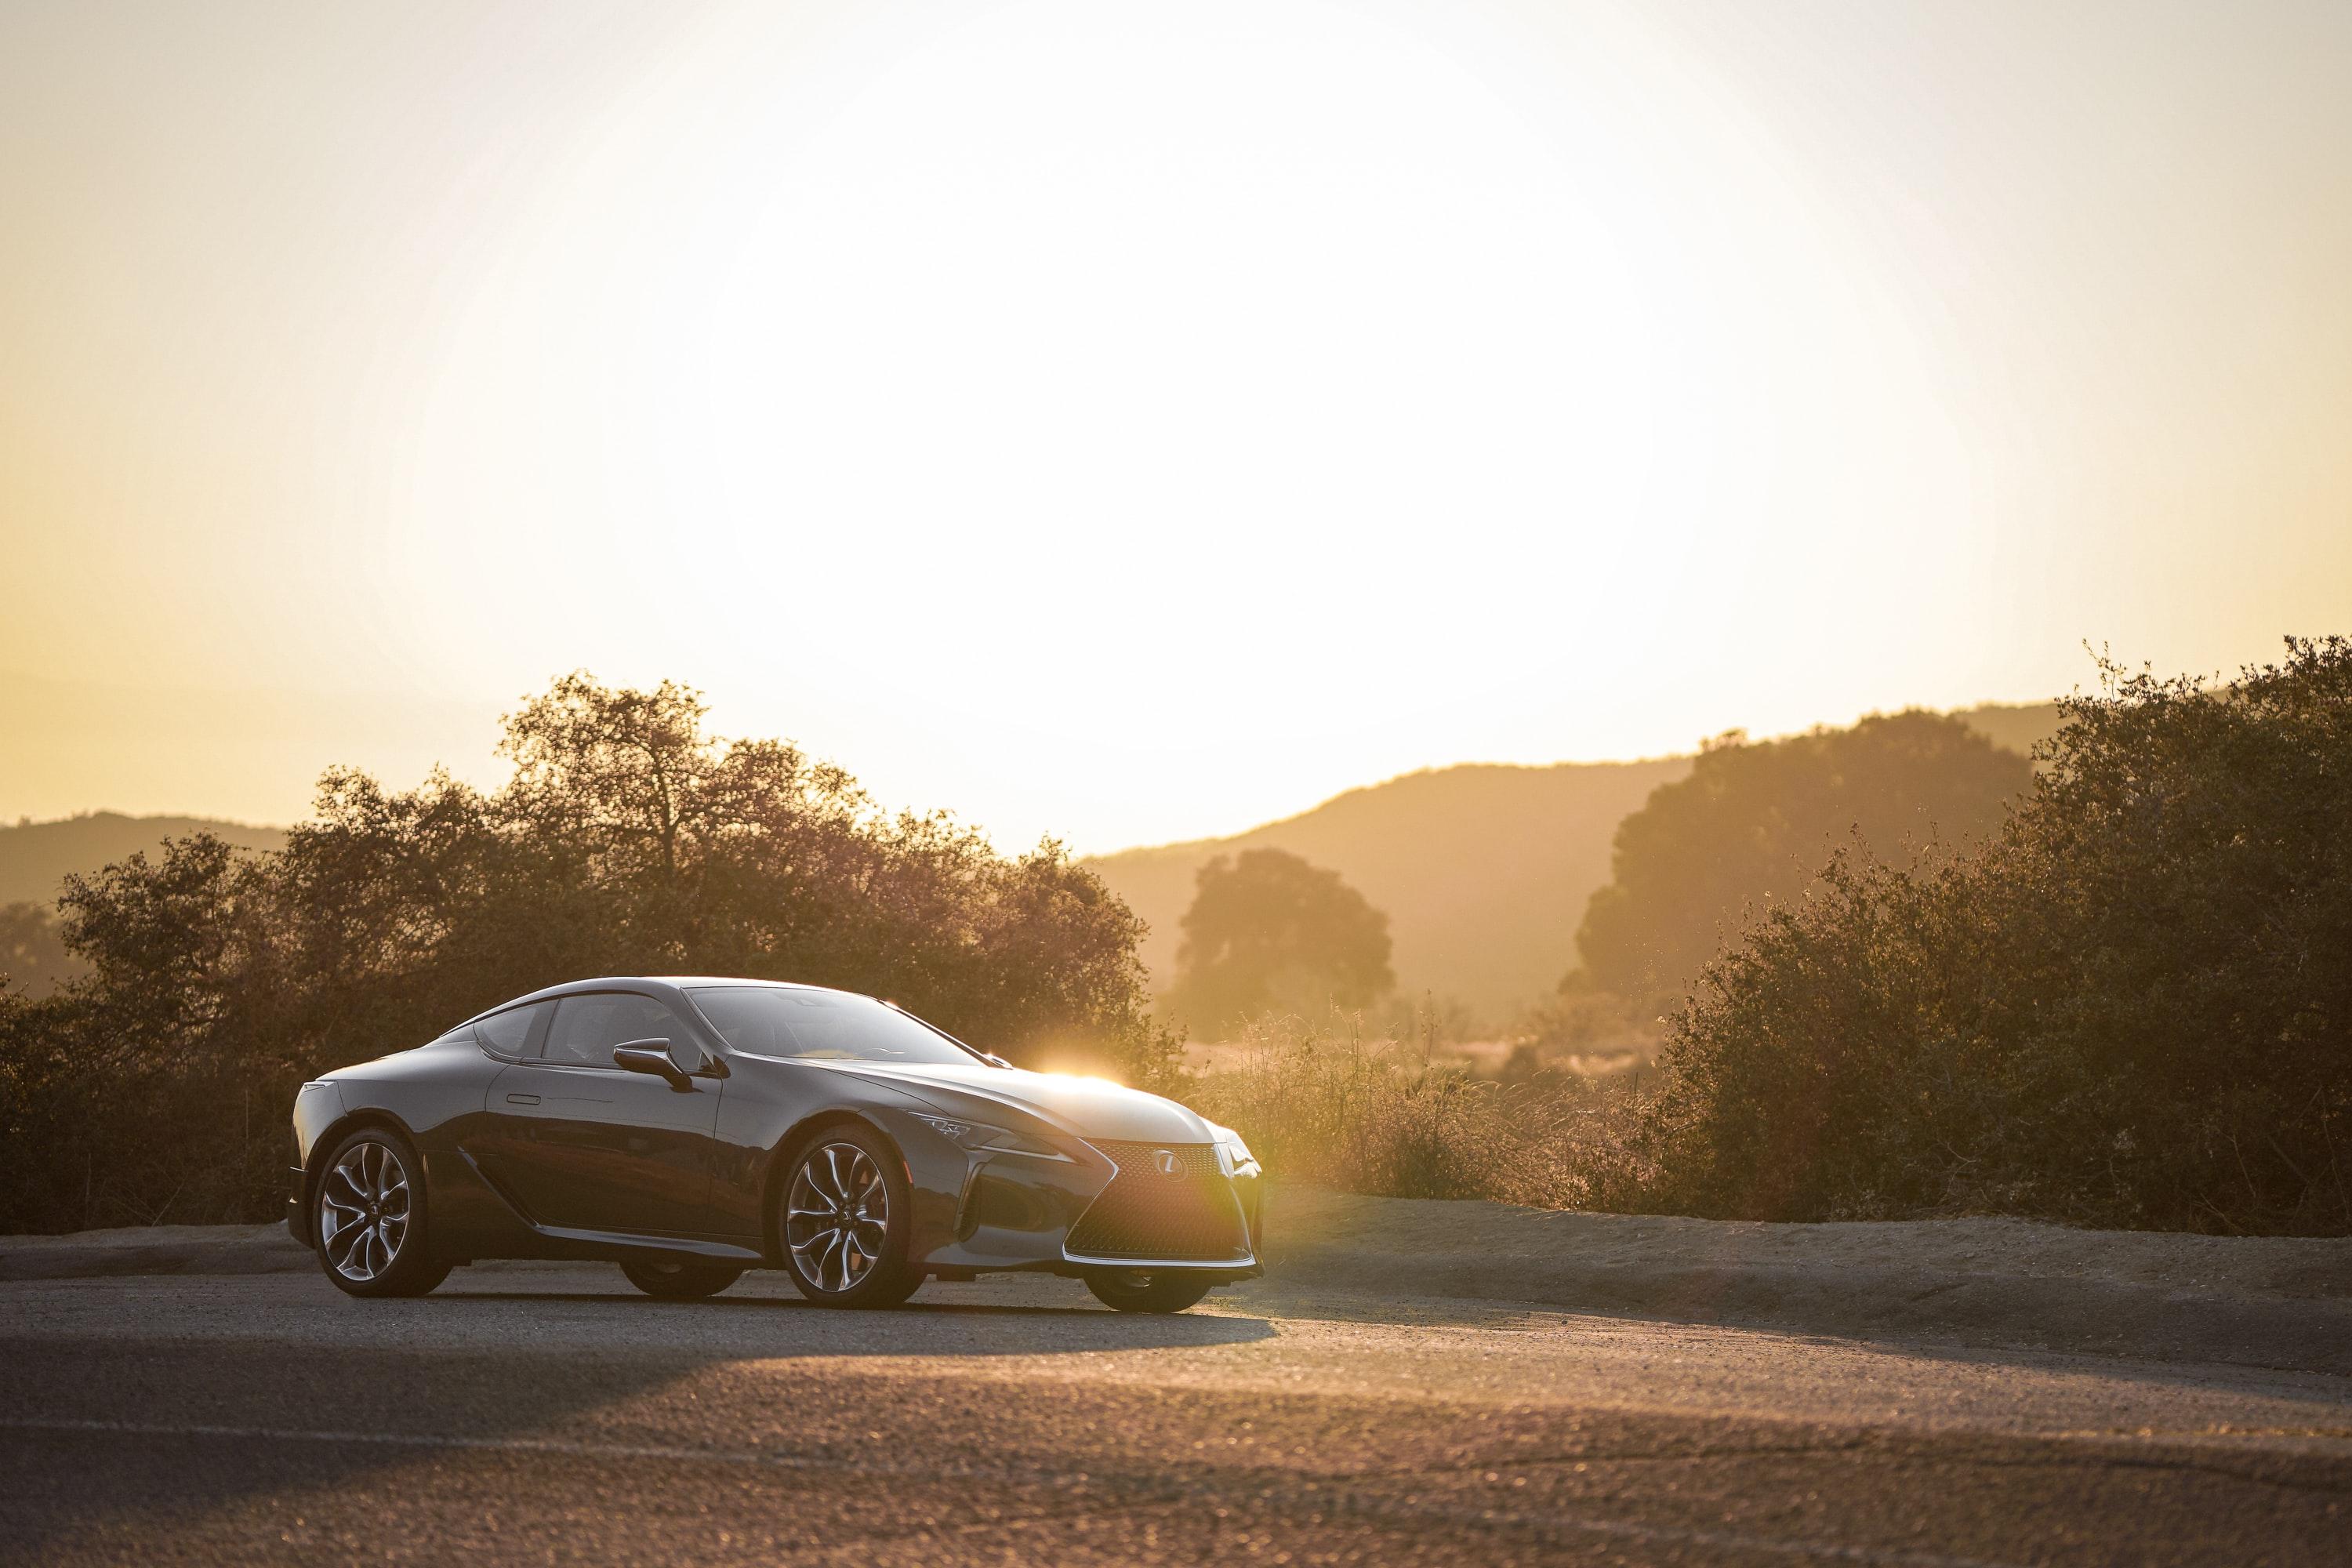 View of a black LC Lexus driving from left to right in front of trees and mountains that are black due to the sun setting and everything is golden.